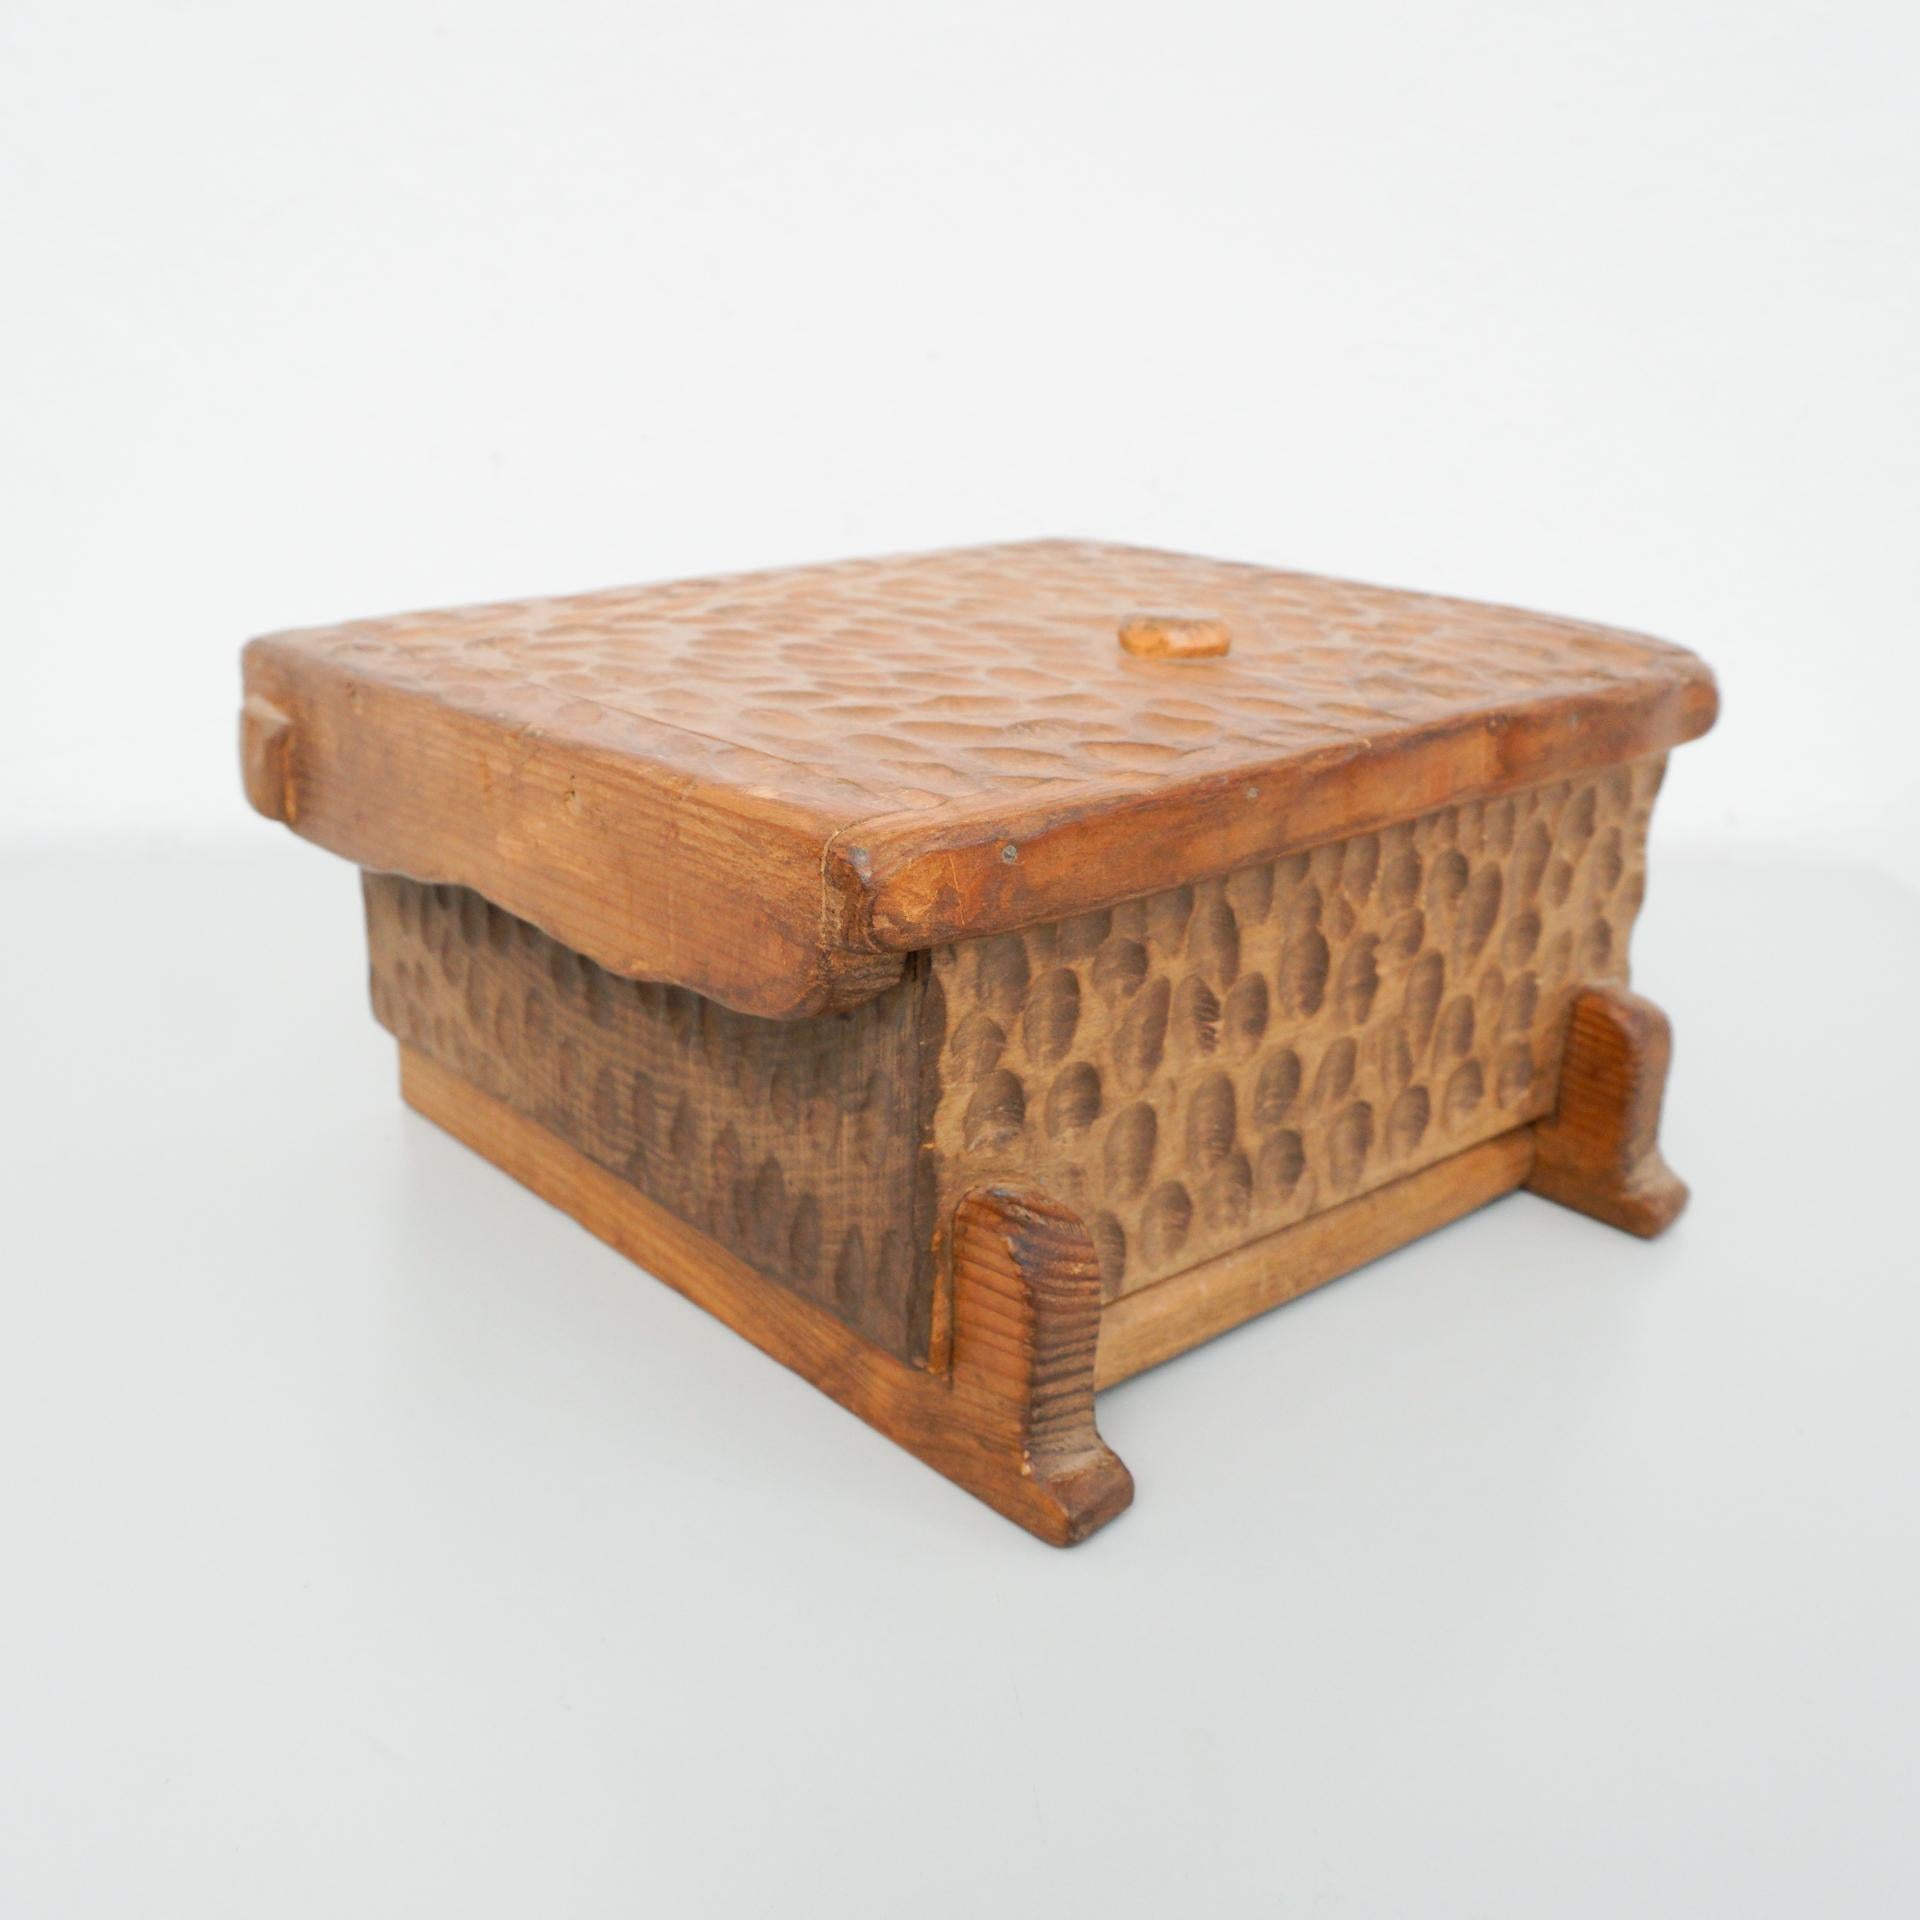 Wood handcarved box after Alexandre Noll
Signed Tony to the underside.
Late 20th century.

In original condition, with minor wear consistent of age and use, preserving a beautiful patina.

The box has a manual lock to prevent it from being